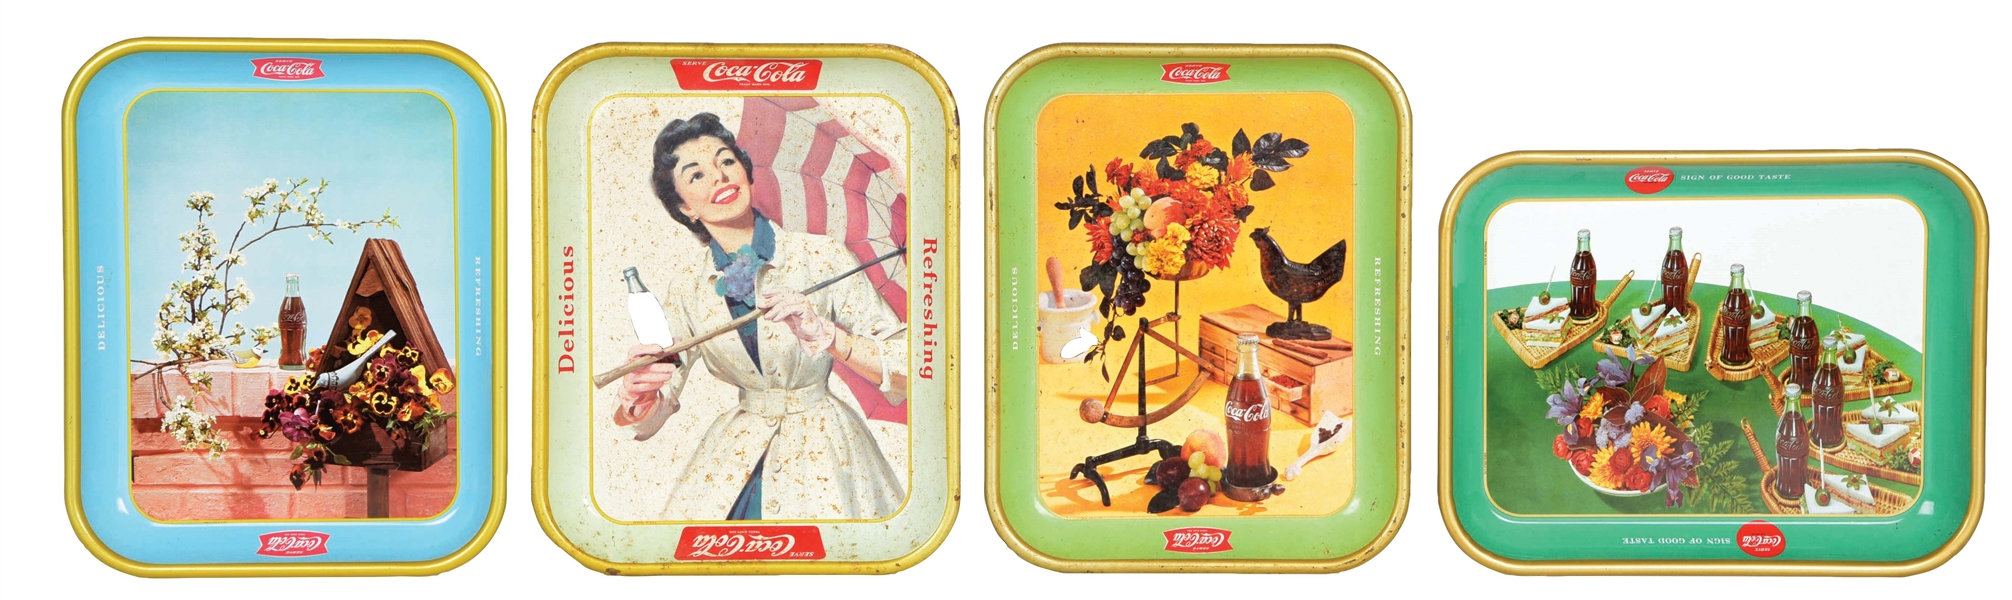 COLLECTION OF 4 COCA-COLA TRAYS.